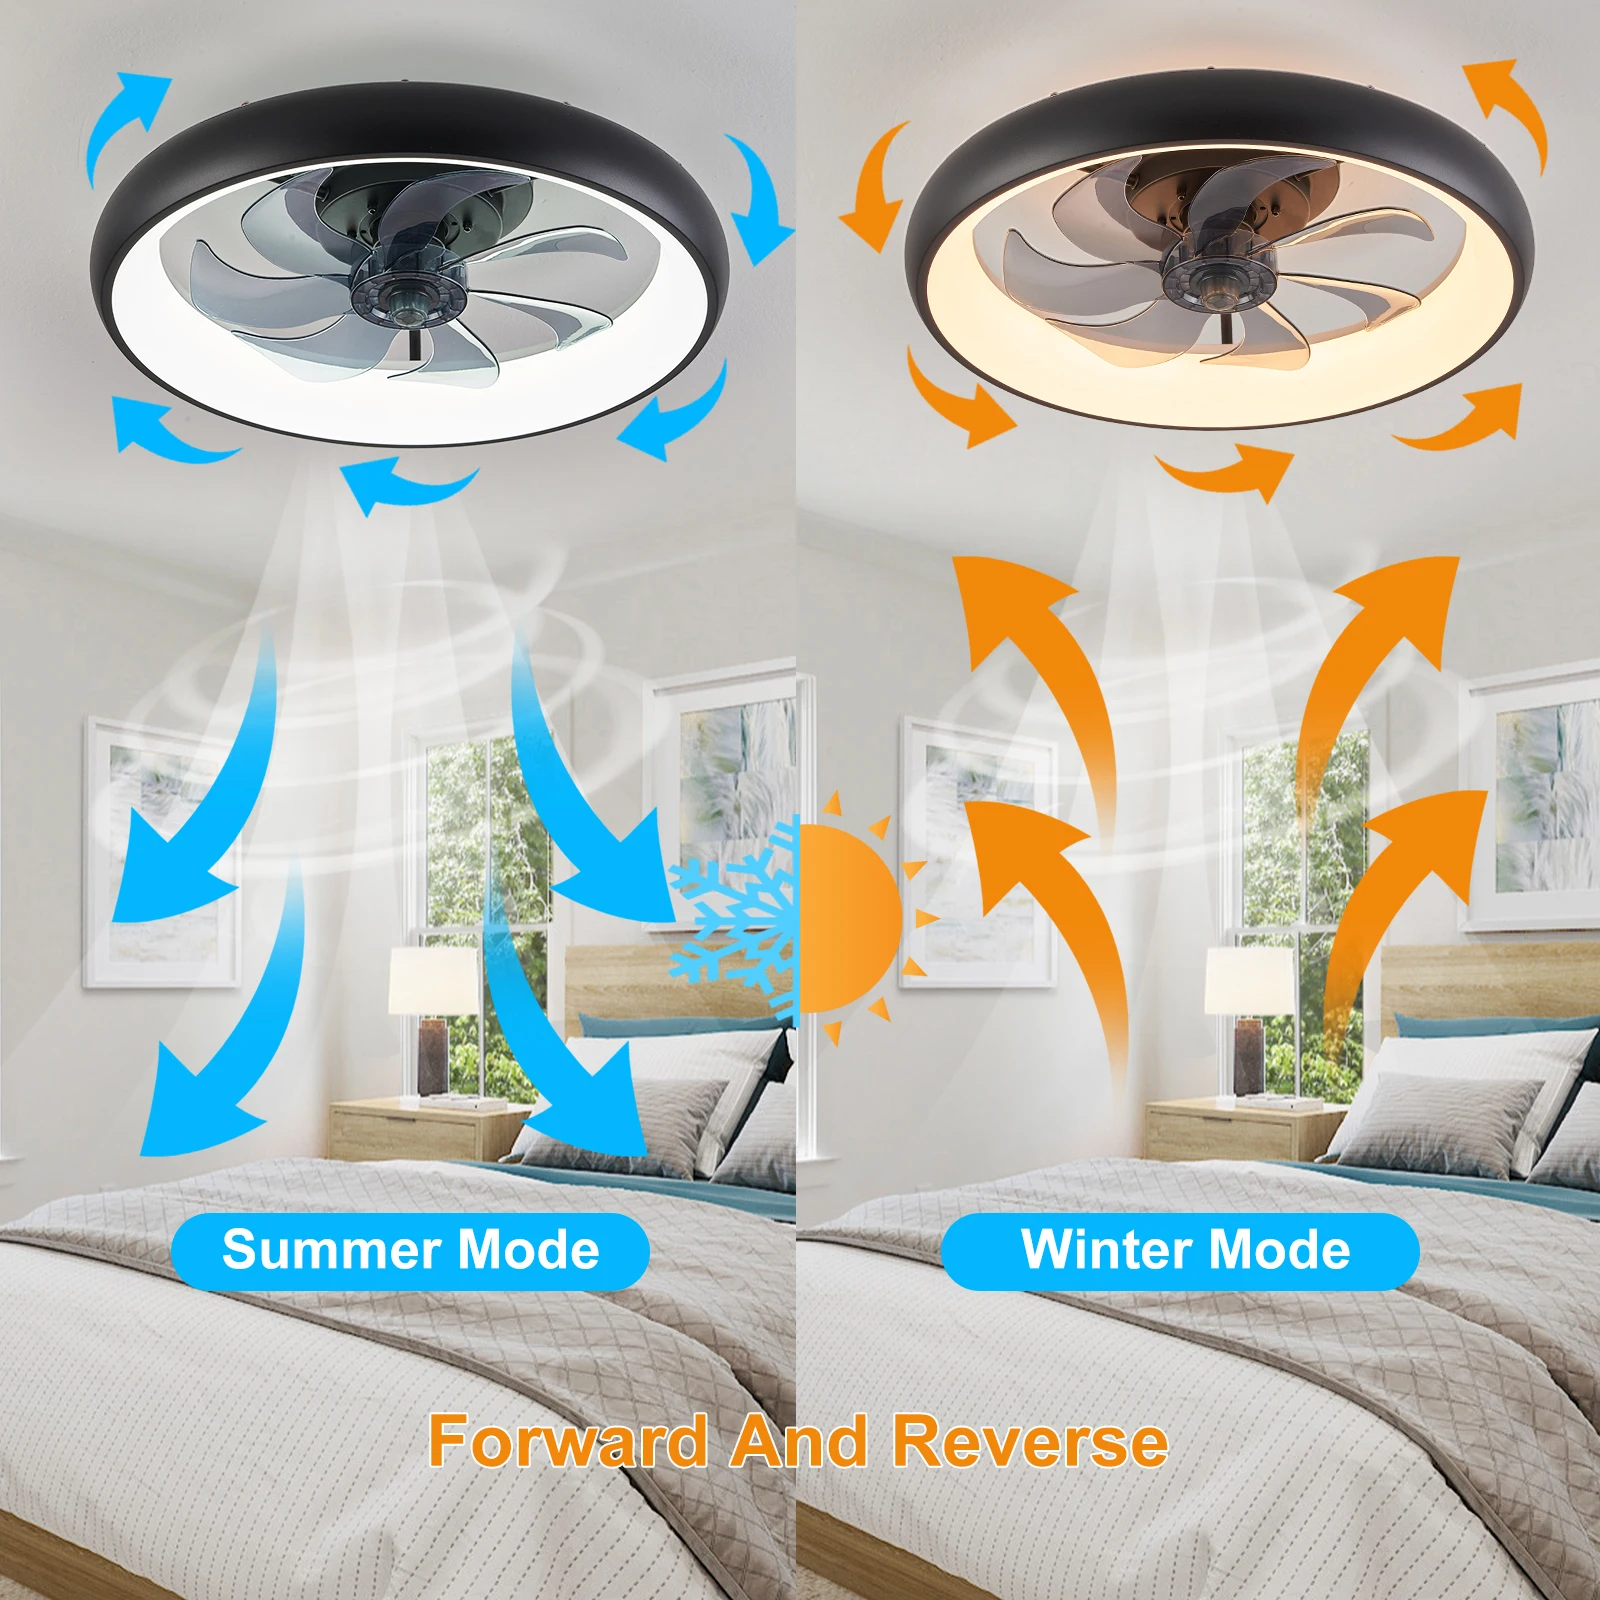 Modern Ceiling Fan Remote Control Dimming Bedroom Living Room Luminaire Adjustable 6 Level Speed Acrylic Ceiling Fan Lamps Black